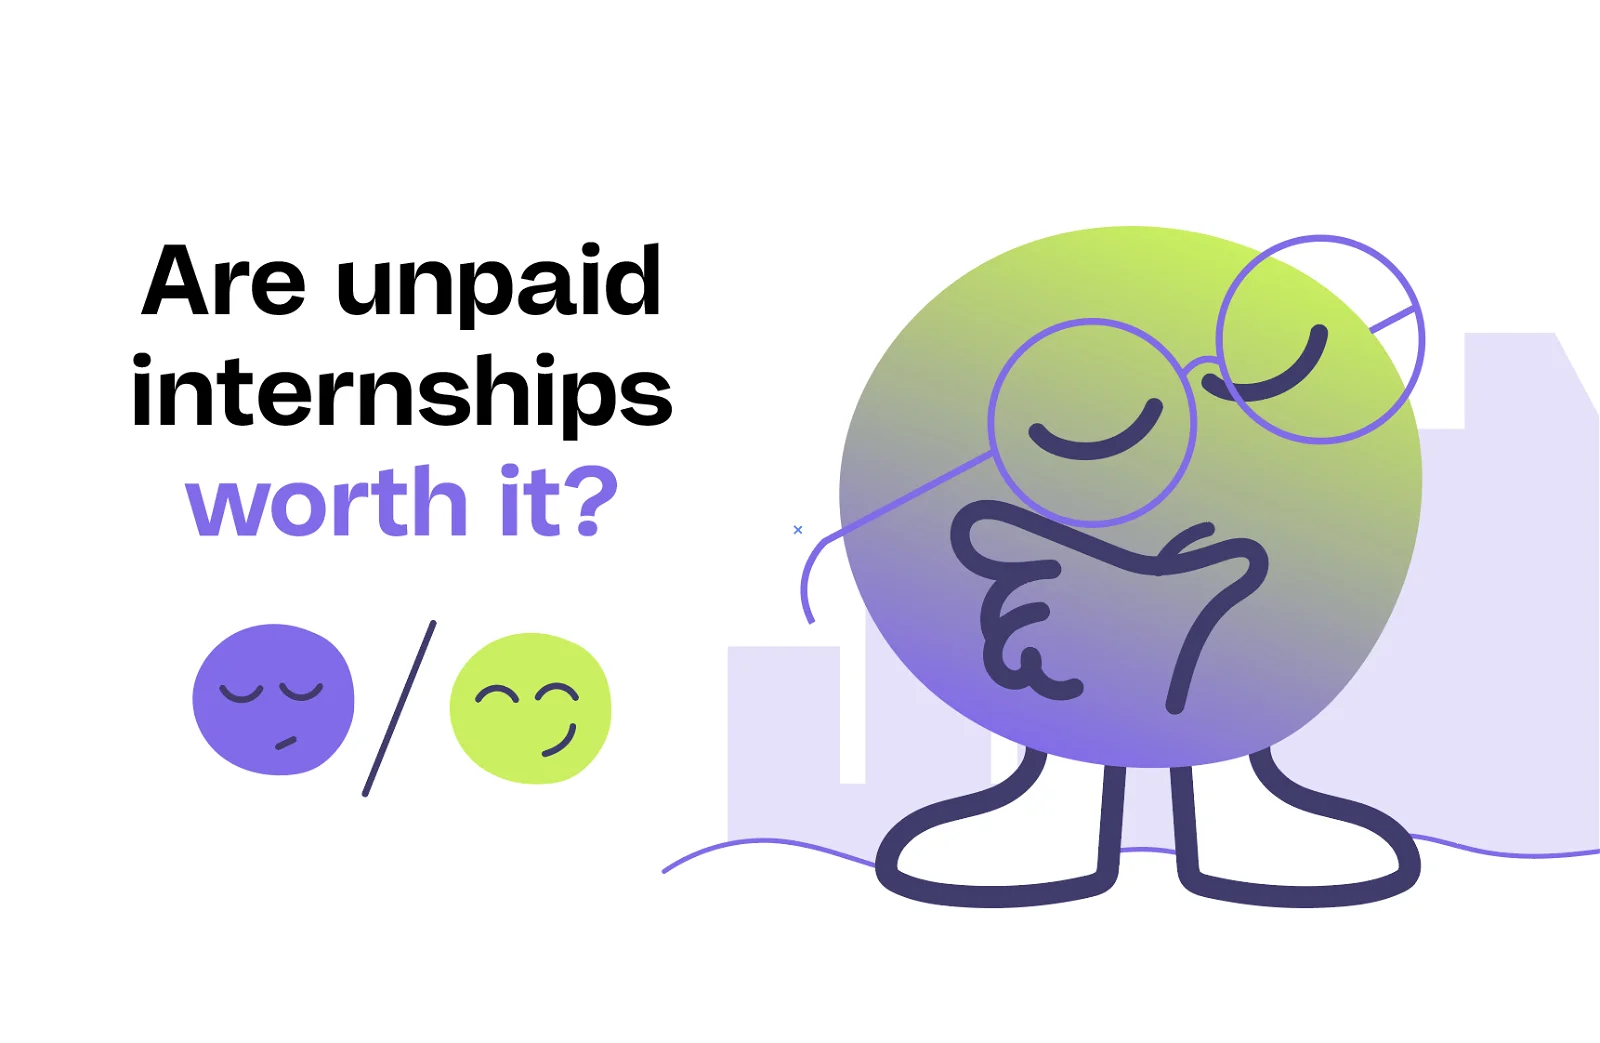 Experts answer are unpaid internships worth it?